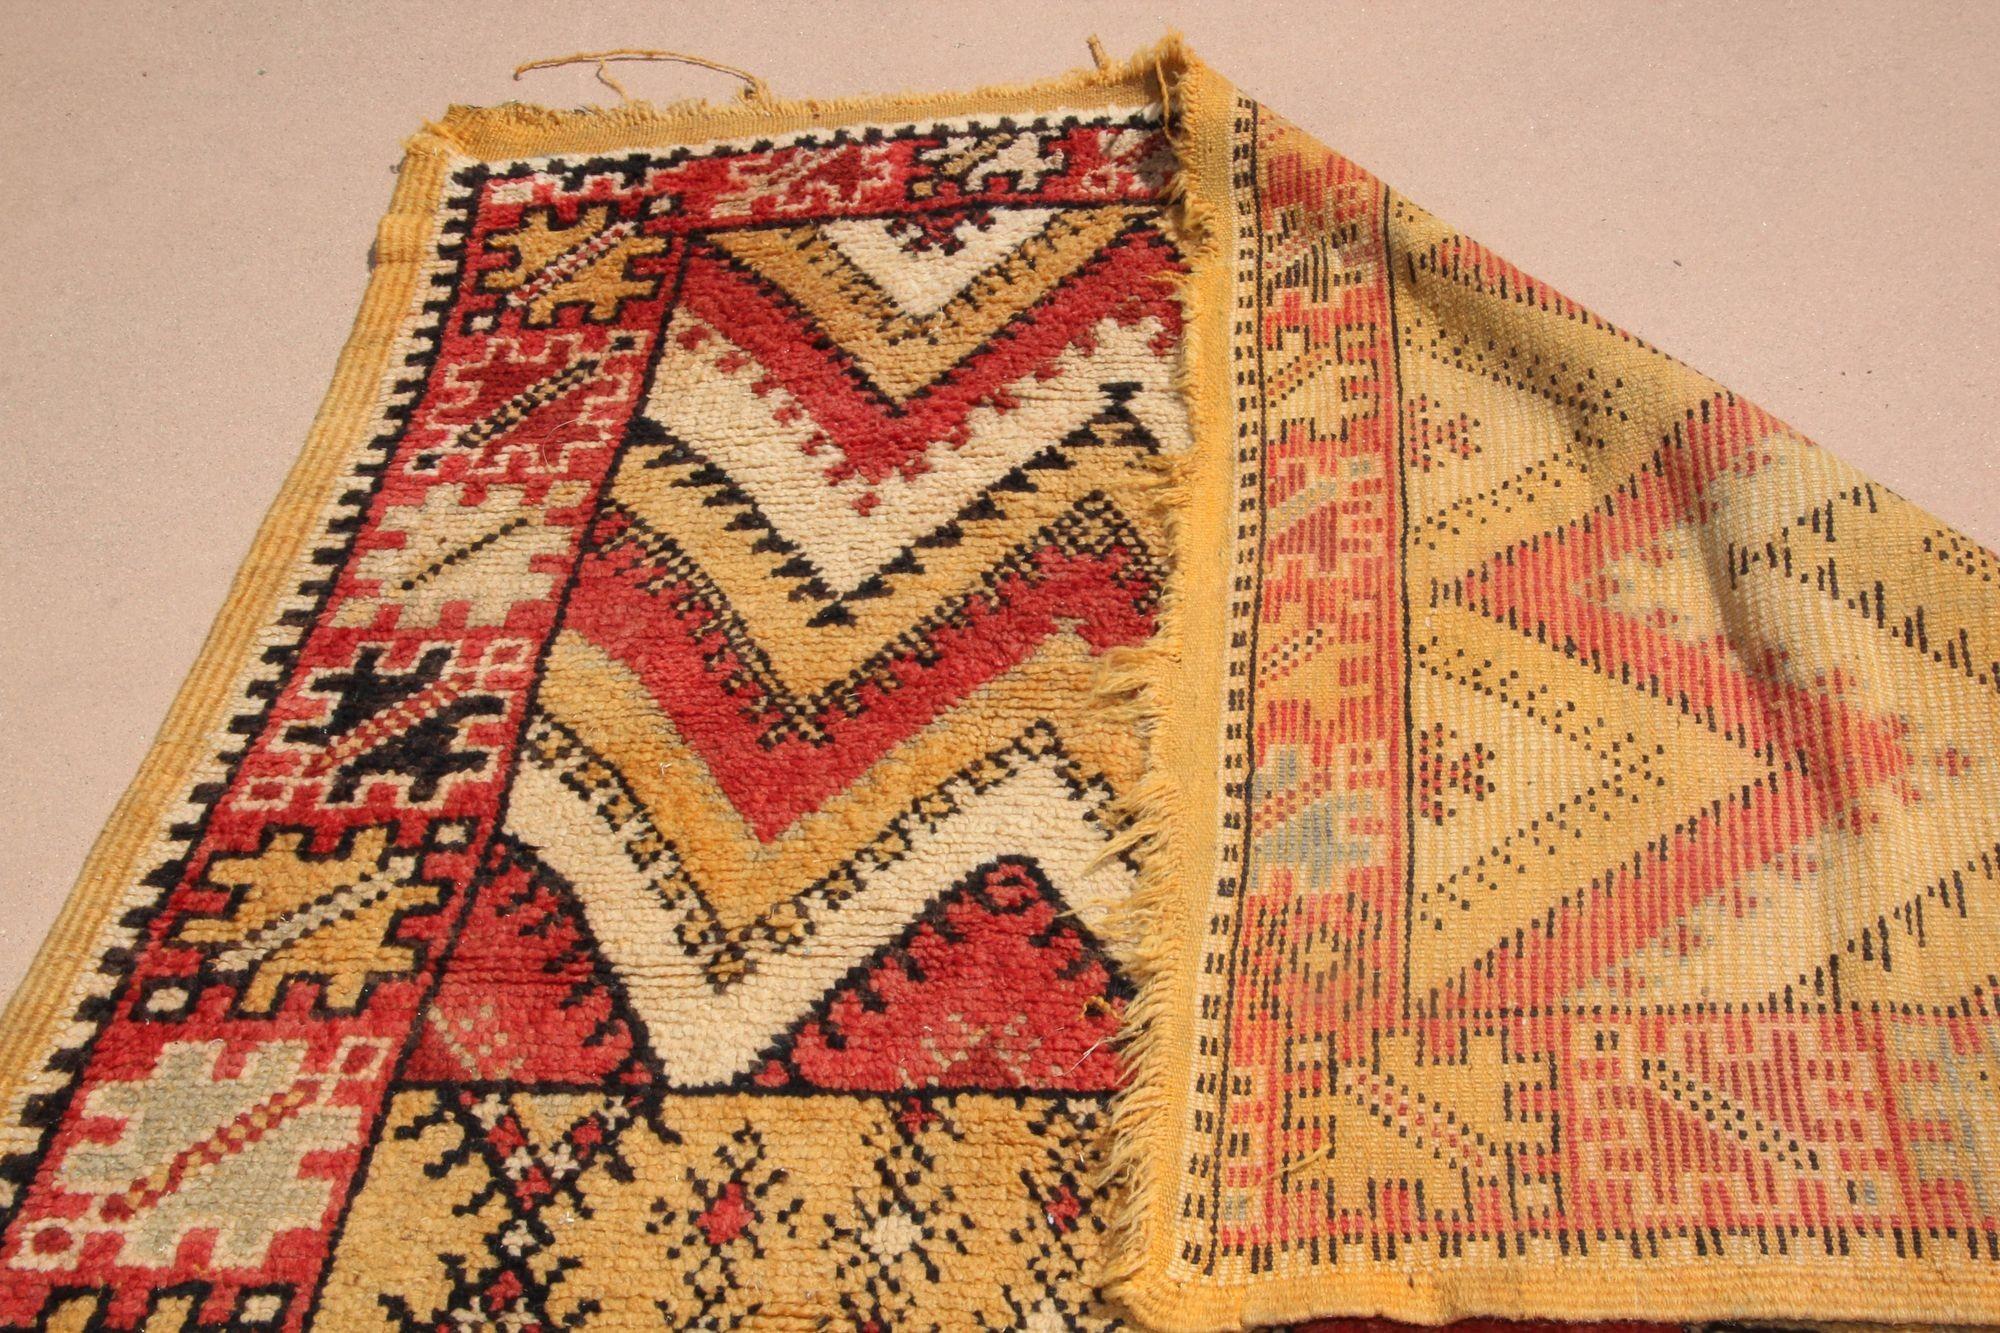 Wool 1960s Moroccan authentic Berber Rug Orange Yellow and Ivory 10 ft x 5ft. For Sale